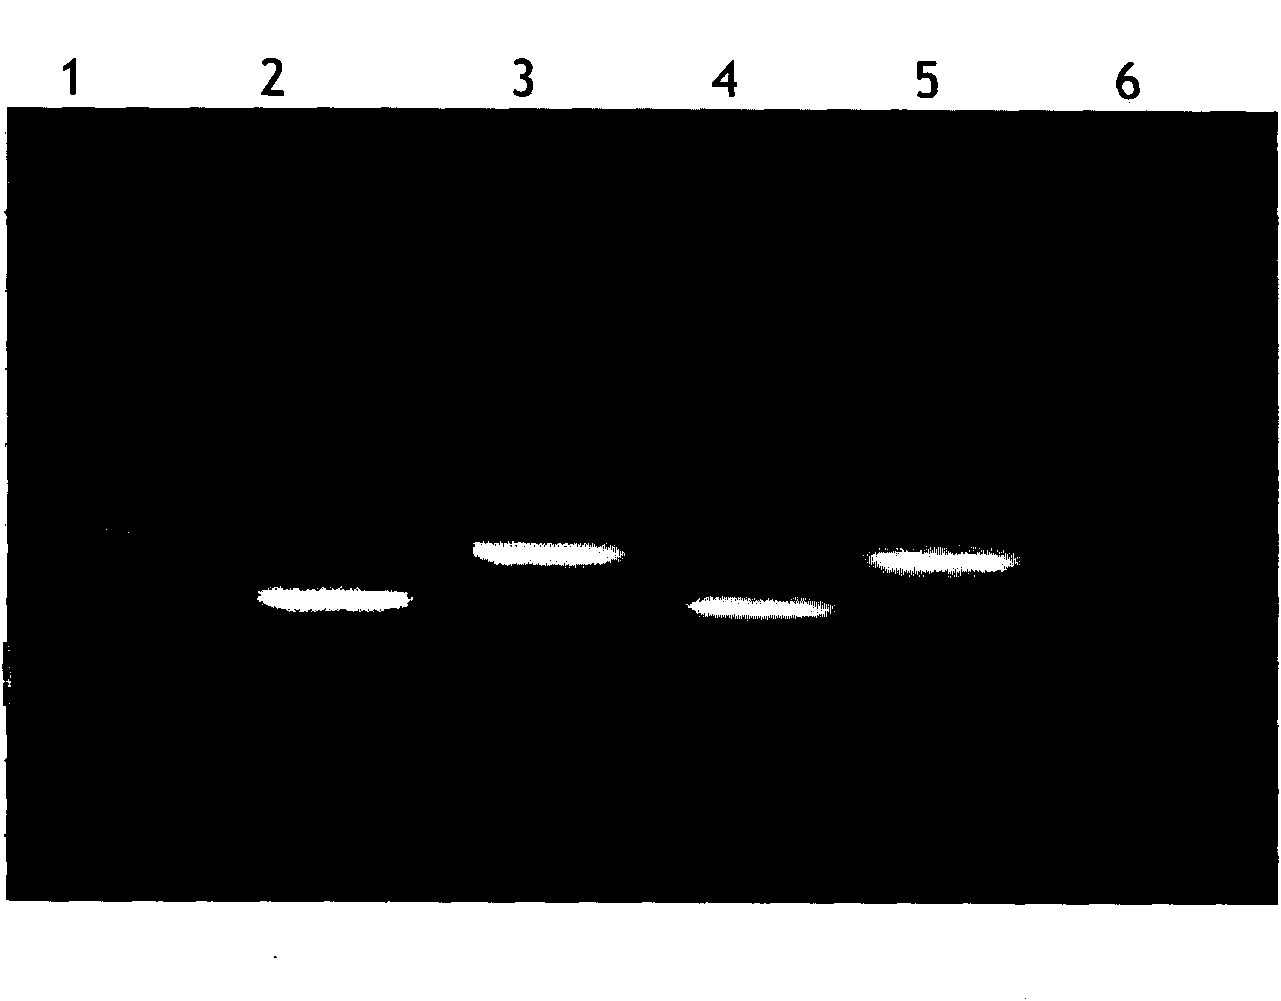 Blood group B epitope mimic peptide and application thereof